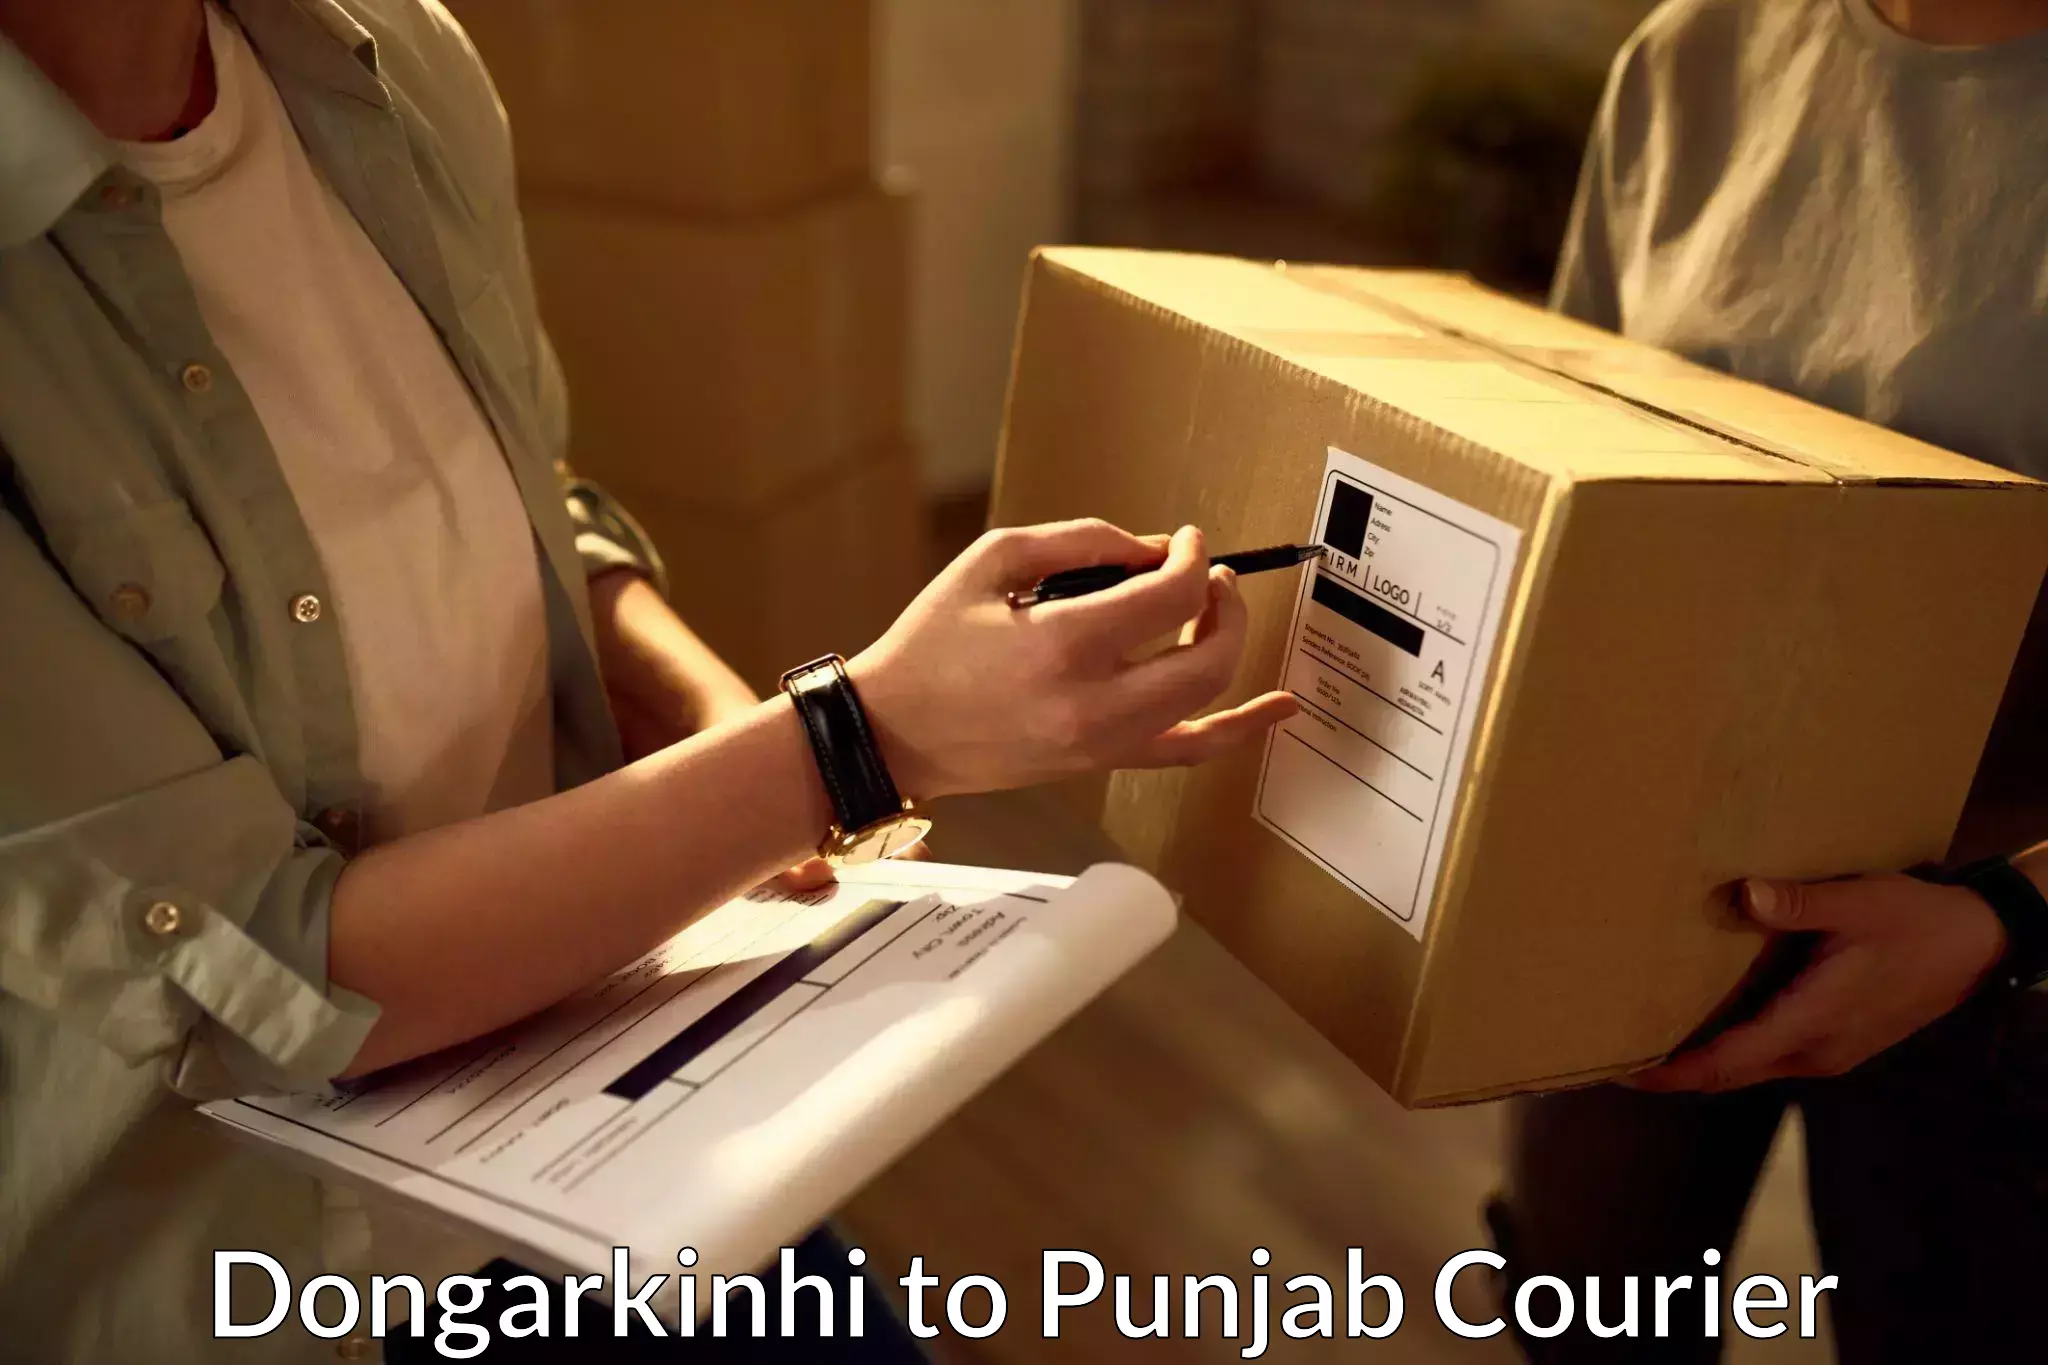 Personal courier services in Dongarkinhi to Dhuri